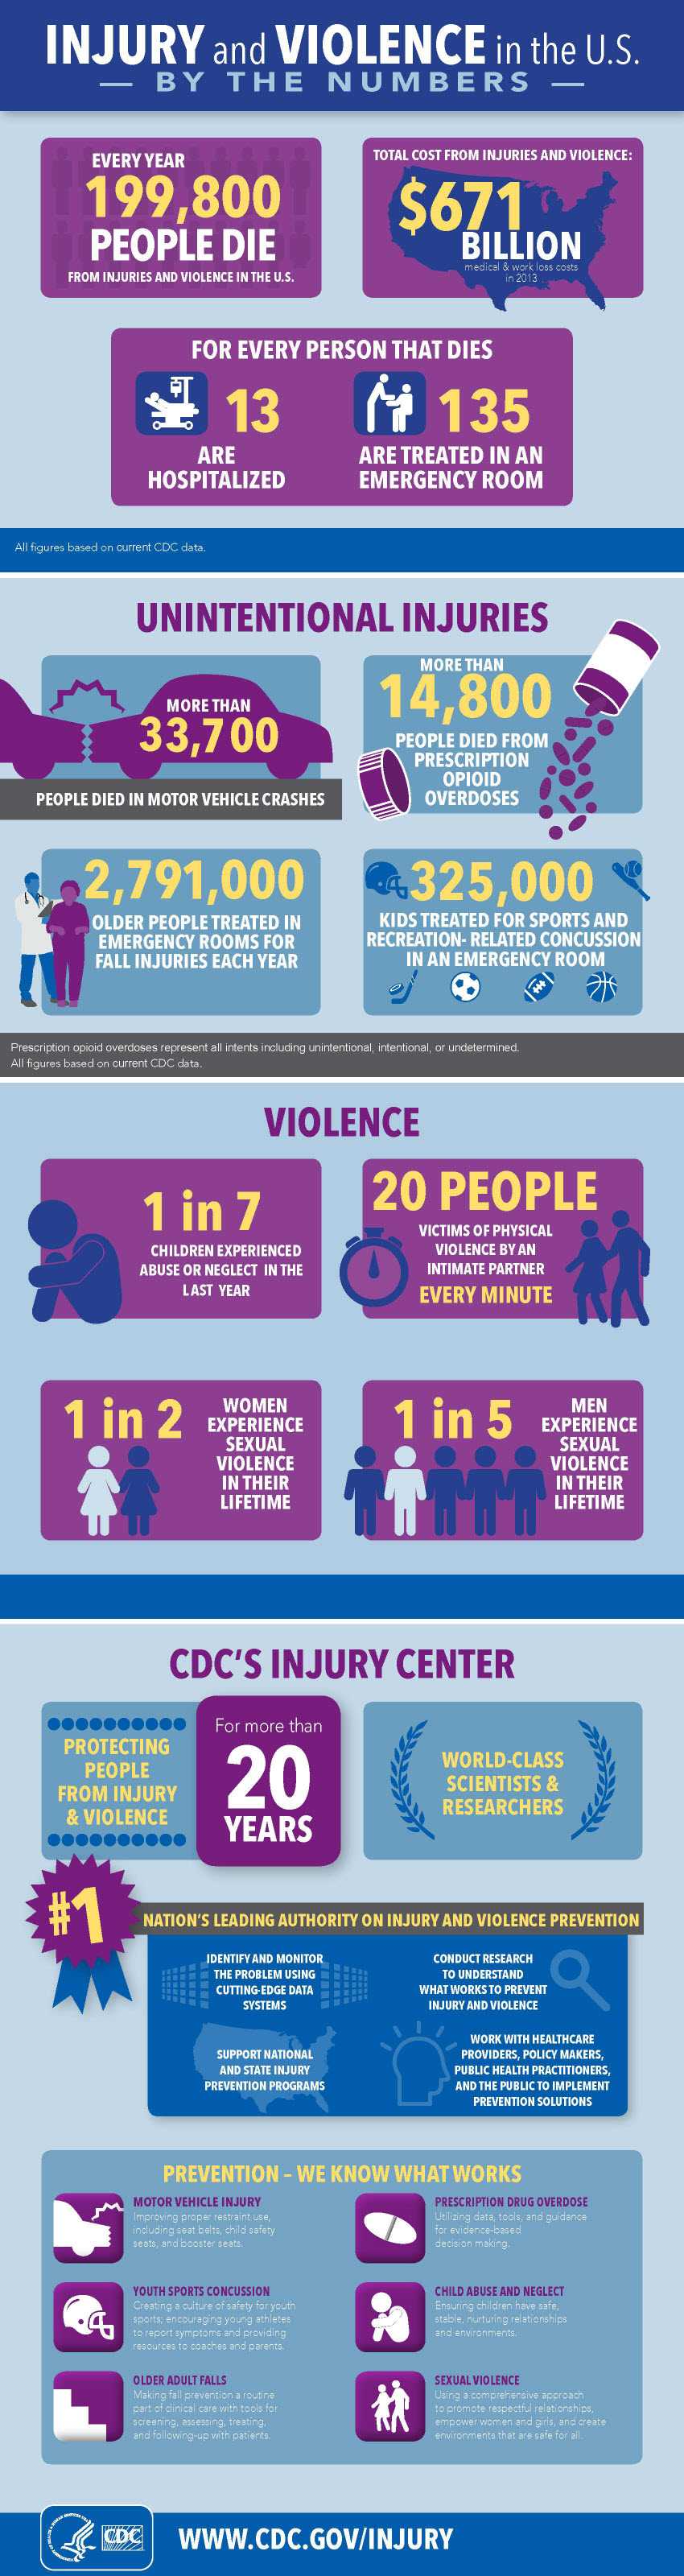 	Injury and Violence in the U.S. by the Numbers